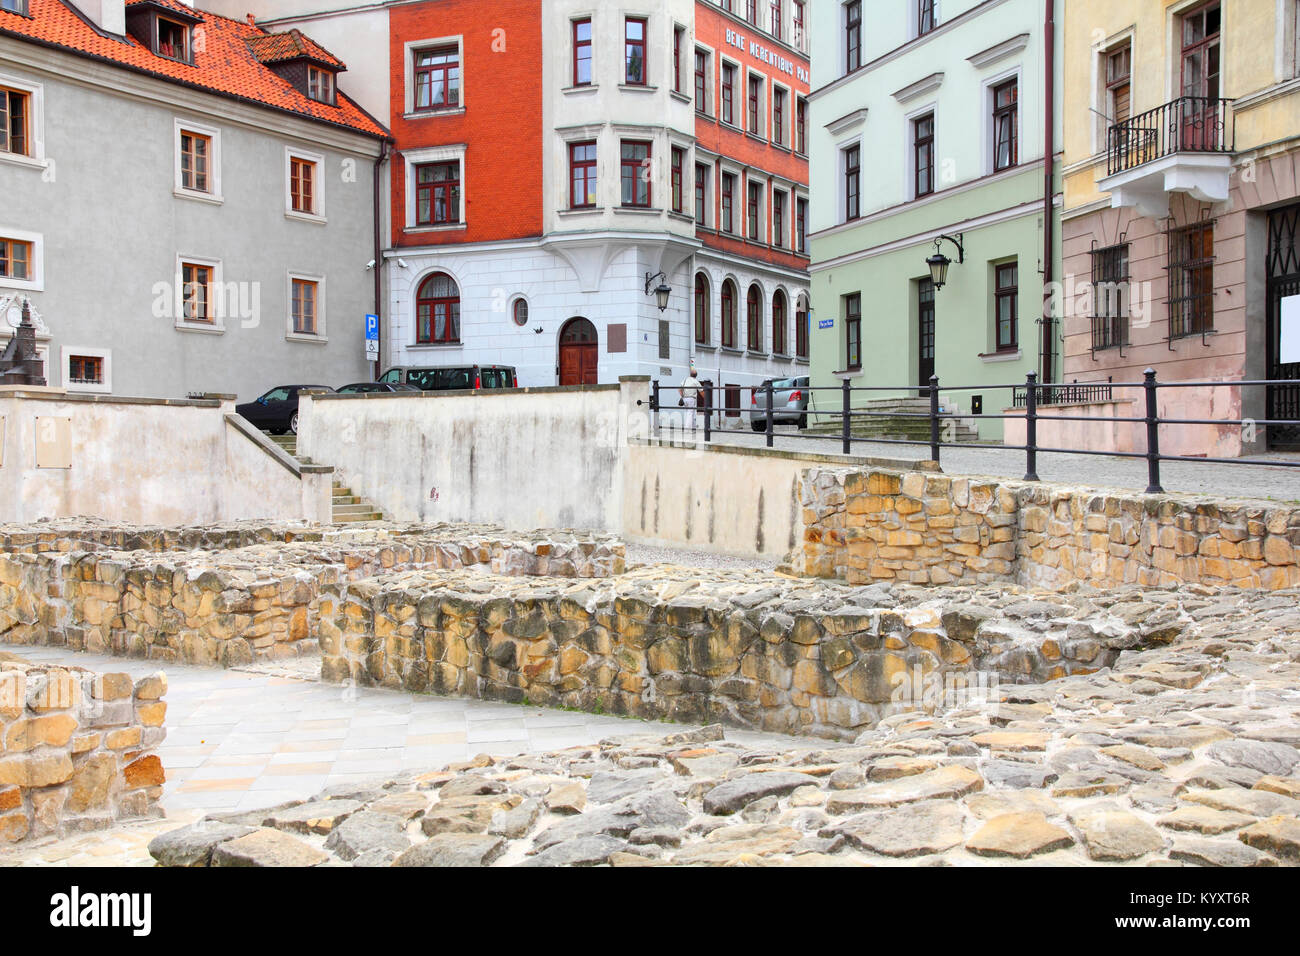 Lublin, city in Poland. Old town view. Stock Photo